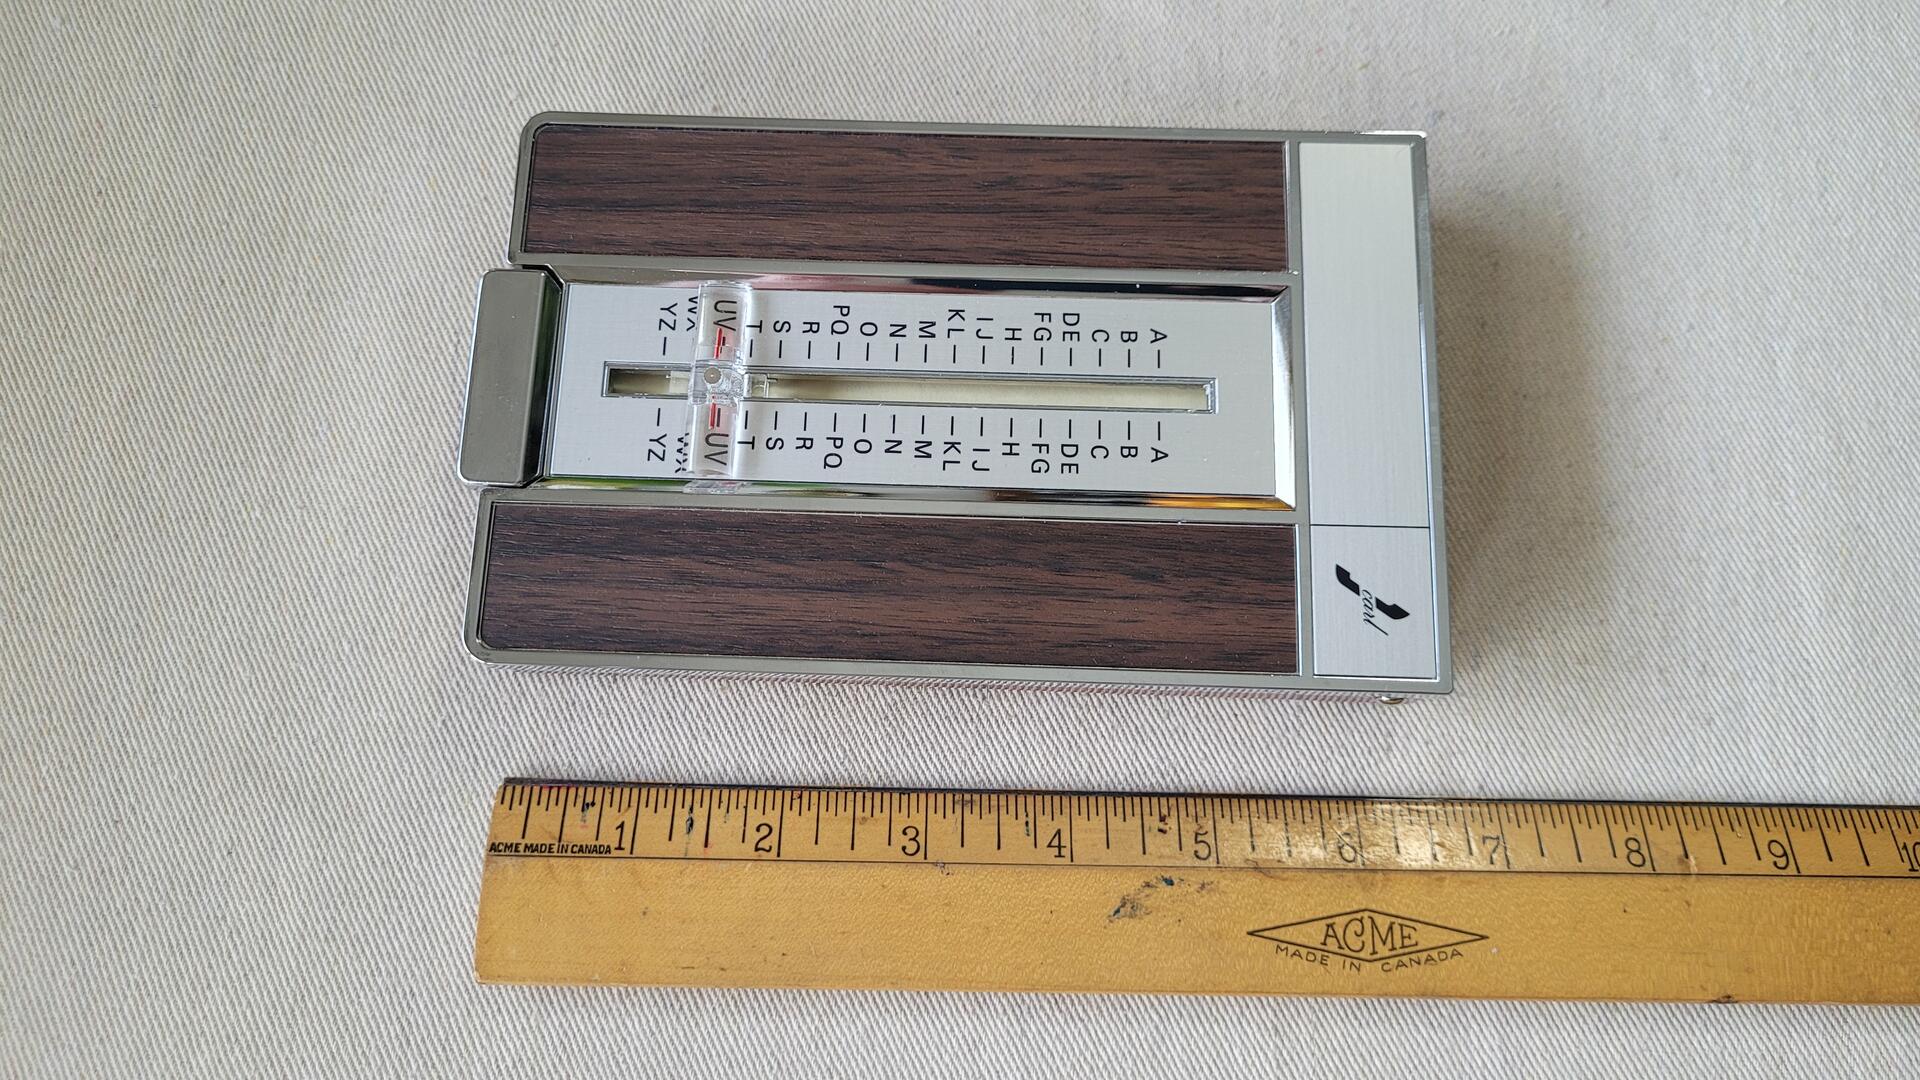 Retro Carl No. 560-D Deluxe Telephone list finder w original box. Vintage 1970s made in Japan collectible office stationery & flip top desk address book